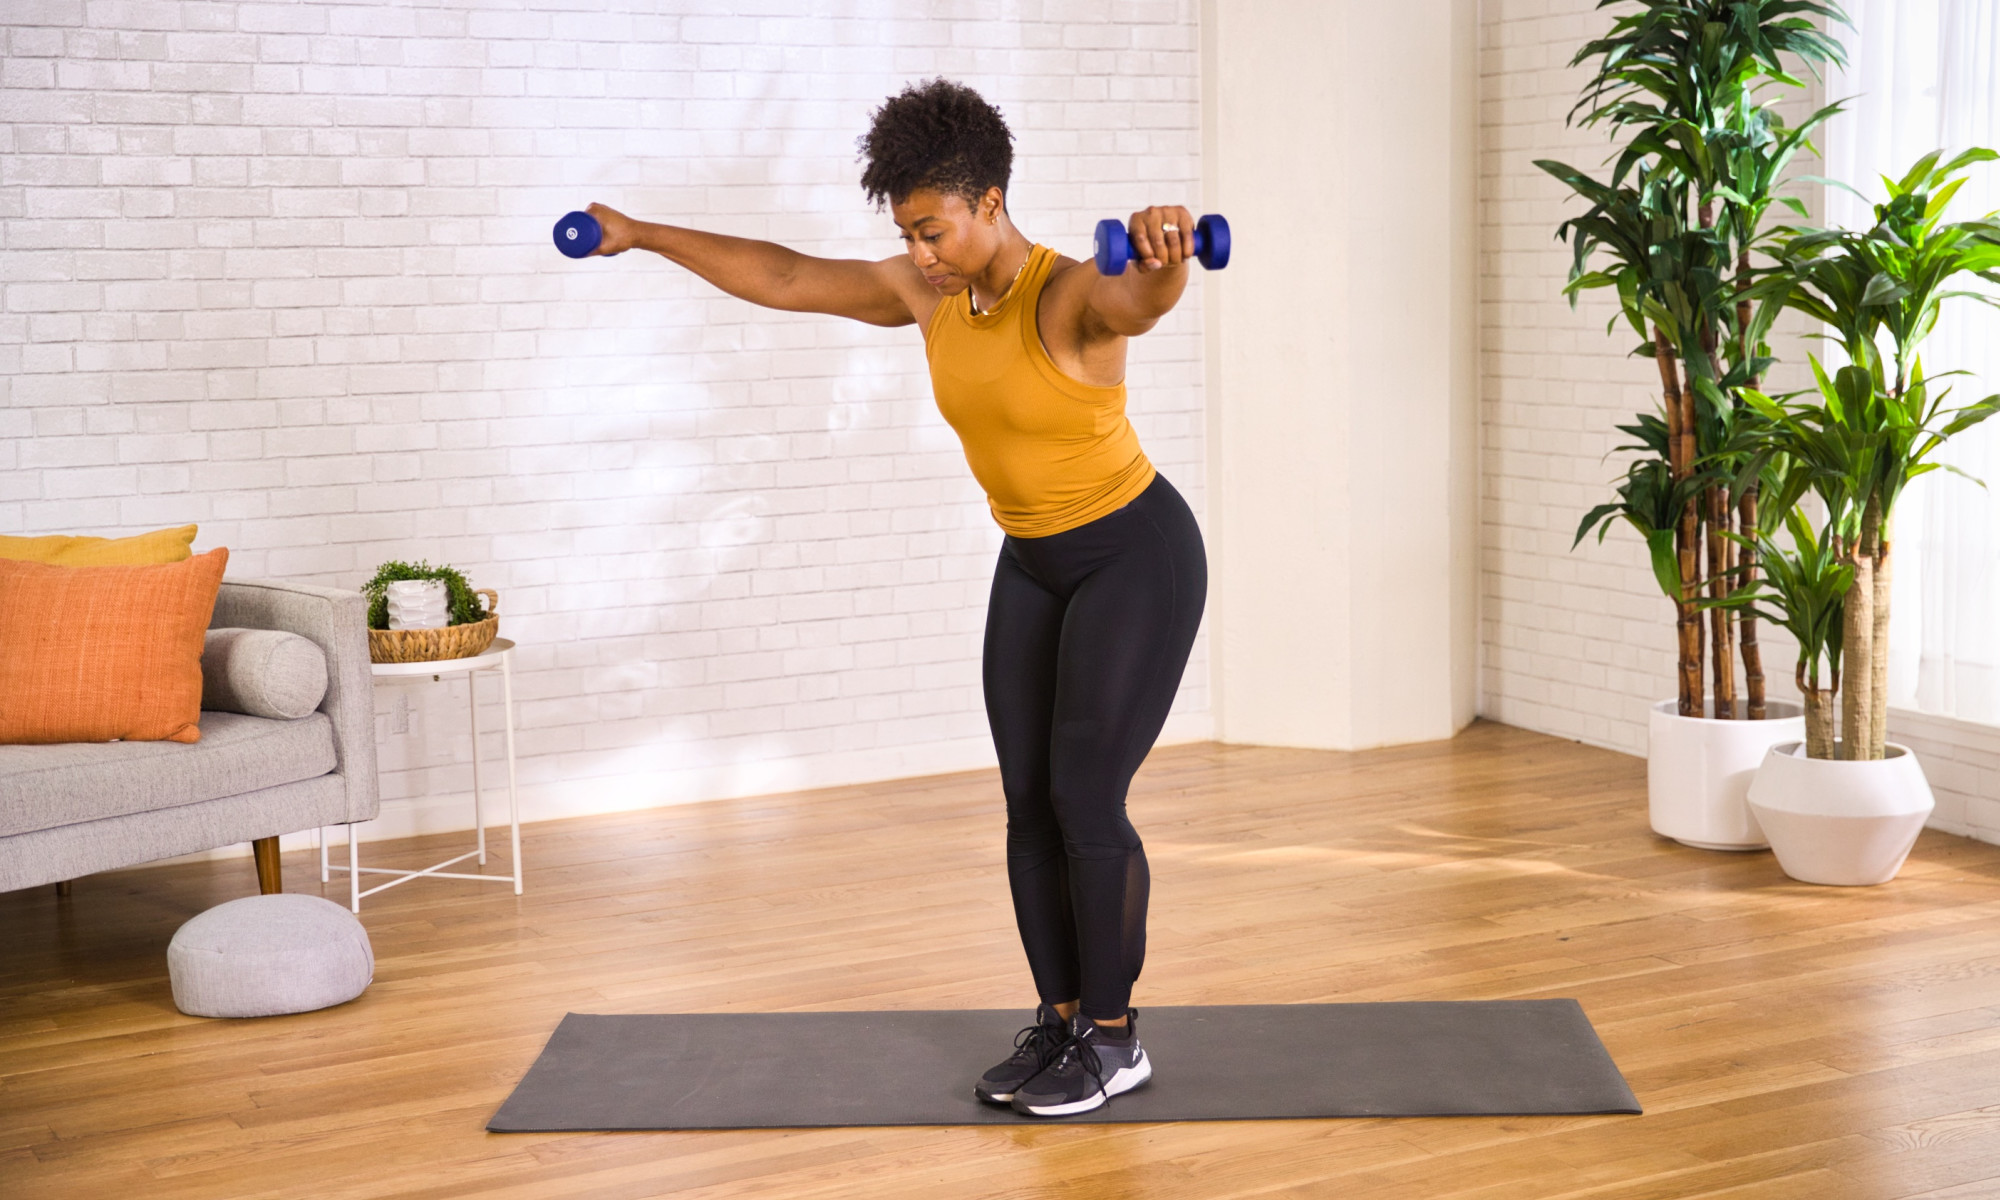 A 5-Move Chest & Arms Workout To Strengthen Your Upper Body